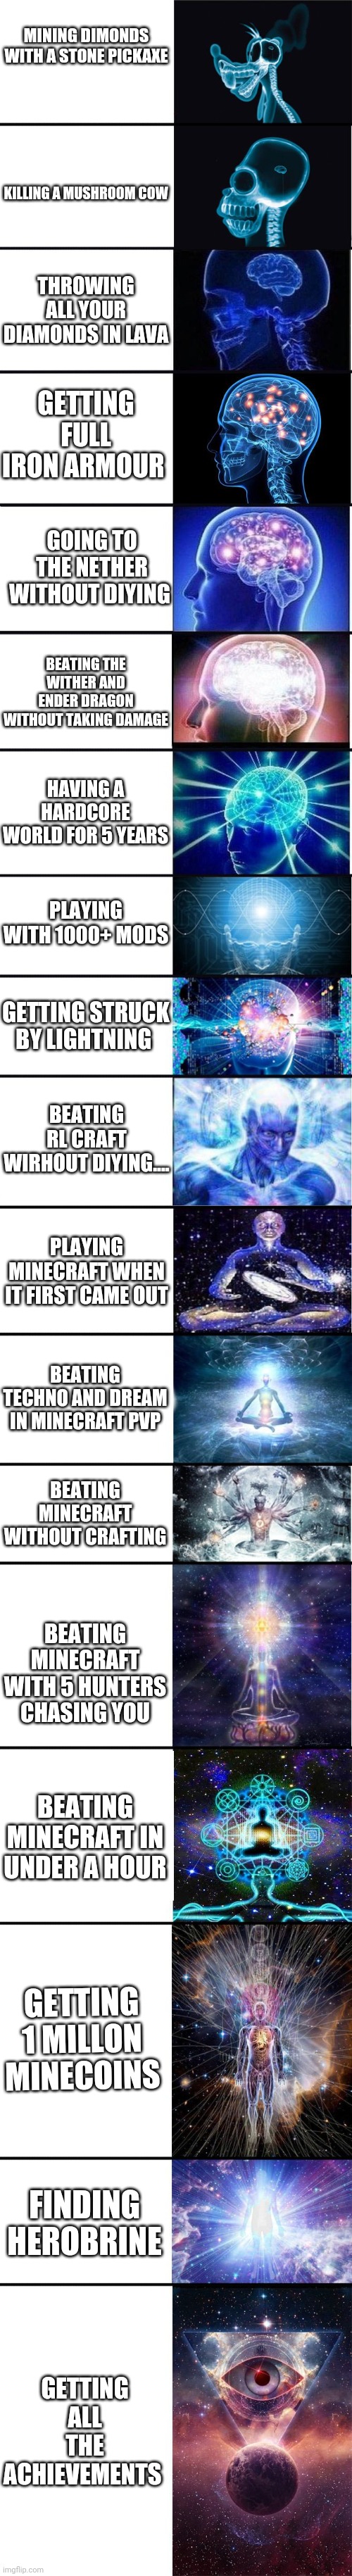 Which one have you done ? |  MINING DIMONDS WITH A STONE PICKAXE; KILLING A MUSHROOM COW; THROWING ALL YOUR DIAMONDS IN LAVA; GETTING FULL IRON ARMOUR; GOING TO THE NETHER WITHOUT DIYING; BEATING THE WITHER AND ENDER DRAGON WITHOUT TAKING DAMAGE; HAVING A HARDCORE WORLD FOR 5 YEARS; PLAYING WITH 1000+ MODS; GETTING STRUCK BY LIGHTNING; BEATING RL CRAFT WIRHOUT DIYING.... PLAYING MINECRAFT WHEN IT FIRST CAME OUT; BEATING TECHNO AND DREAM IN MINECRAFT PVP; BEATING MINECRAFT WITHOUT CRAFTING; BEATING MINECRAFT WITH 5 HUNTERS CHASING YOU; BEATING MINECRAFT IN UNDER A HOUR; GETTING 1 MILLON MINECOINS; FINDING HEROBRINE; GETTING ALL THE ACHIEVEMENTS | image tagged in expanding brain 9001,minecraft,gaming | made w/ Imgflip meme maker